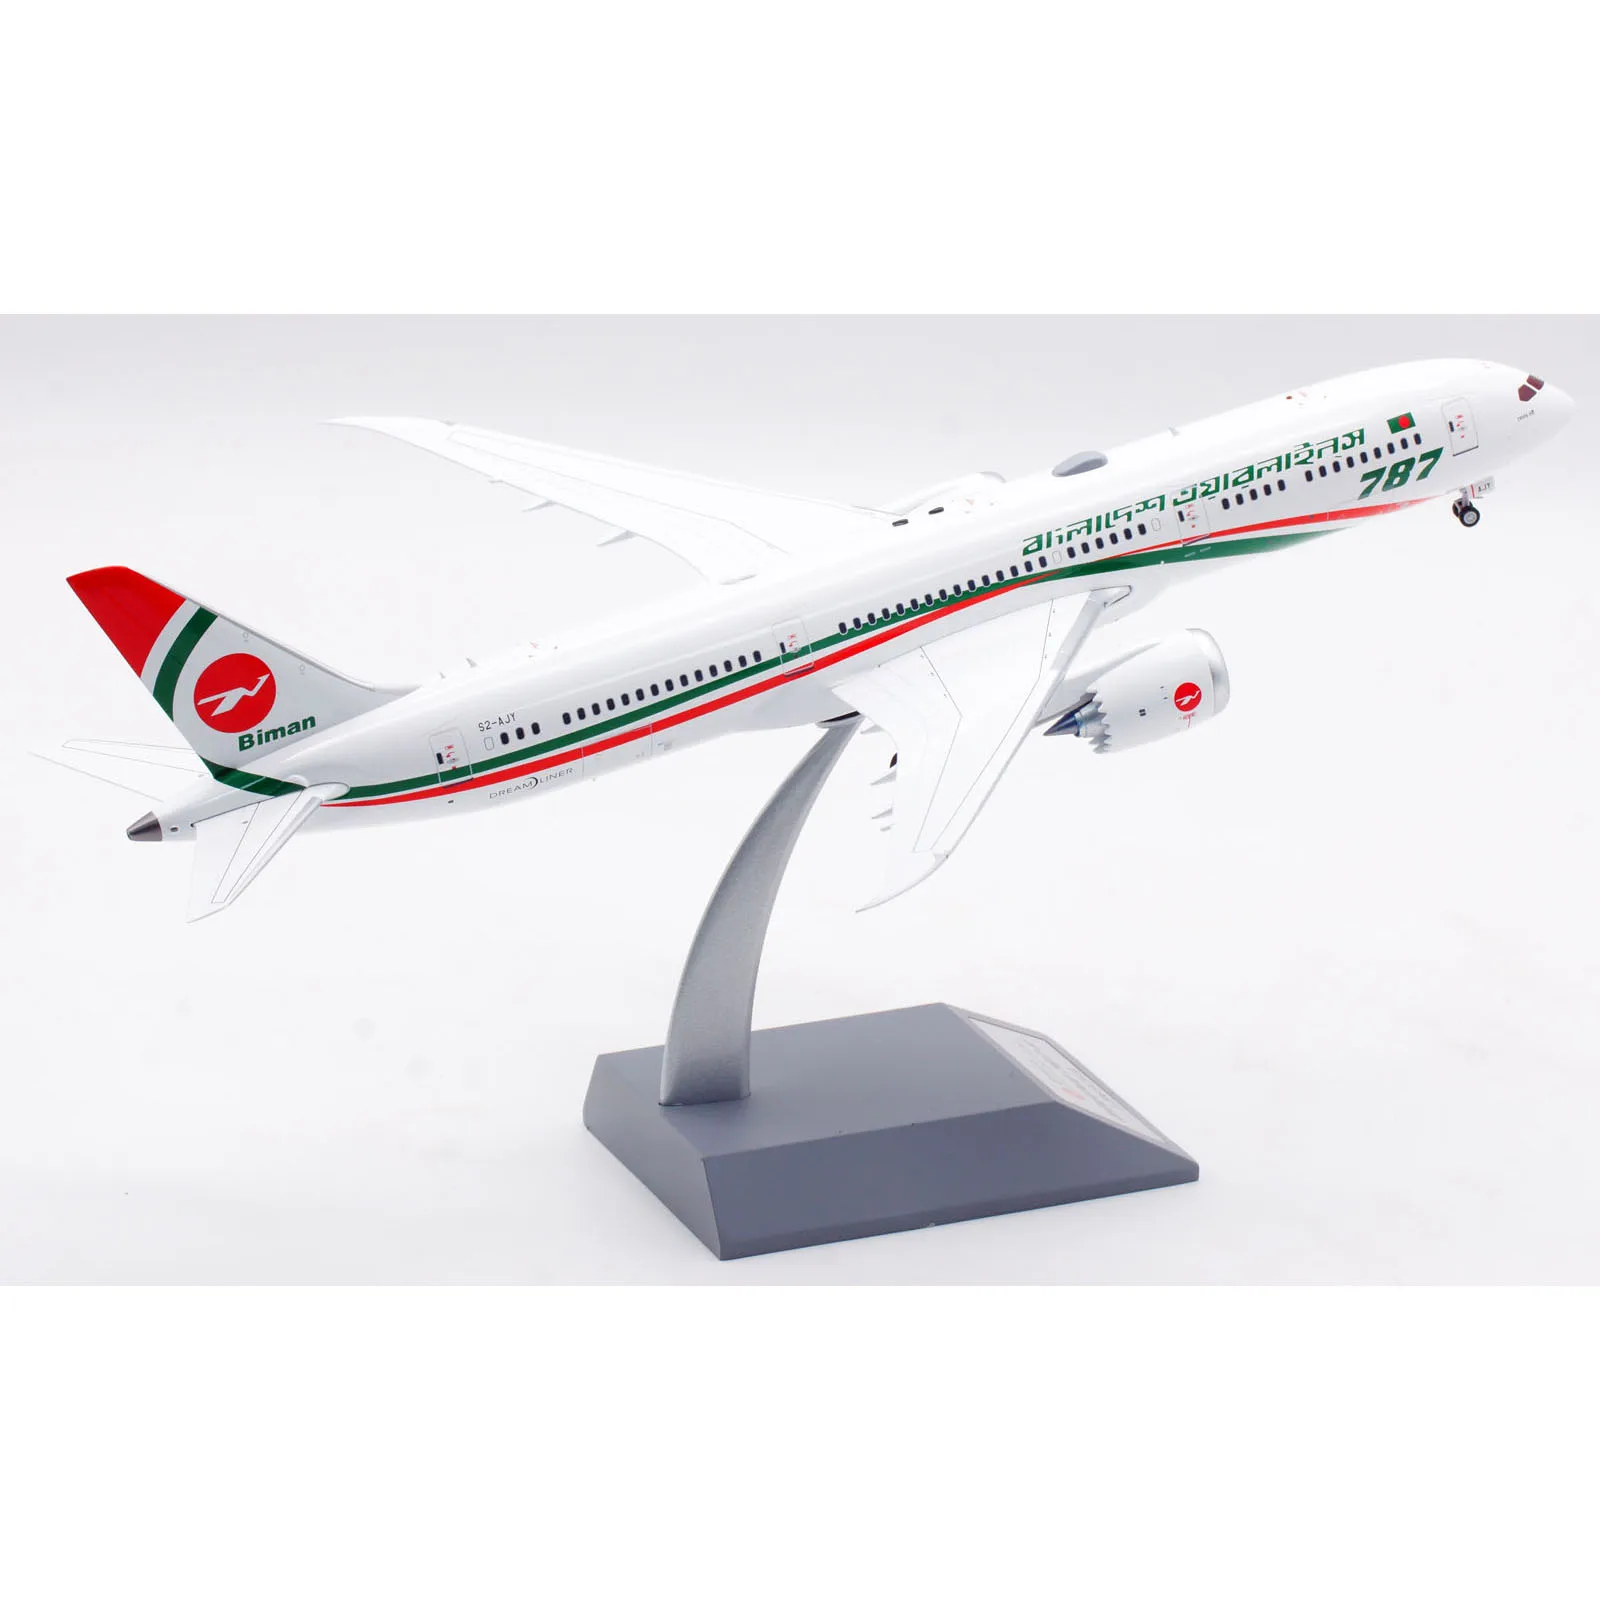 INFLIGHT Airlines Boeing B787-9 Diecast Aircraft Model S2-AJY, Alloy Collectible Plane Gift, B789EY1123, 1:200, Biman, Bangladesh Airlines